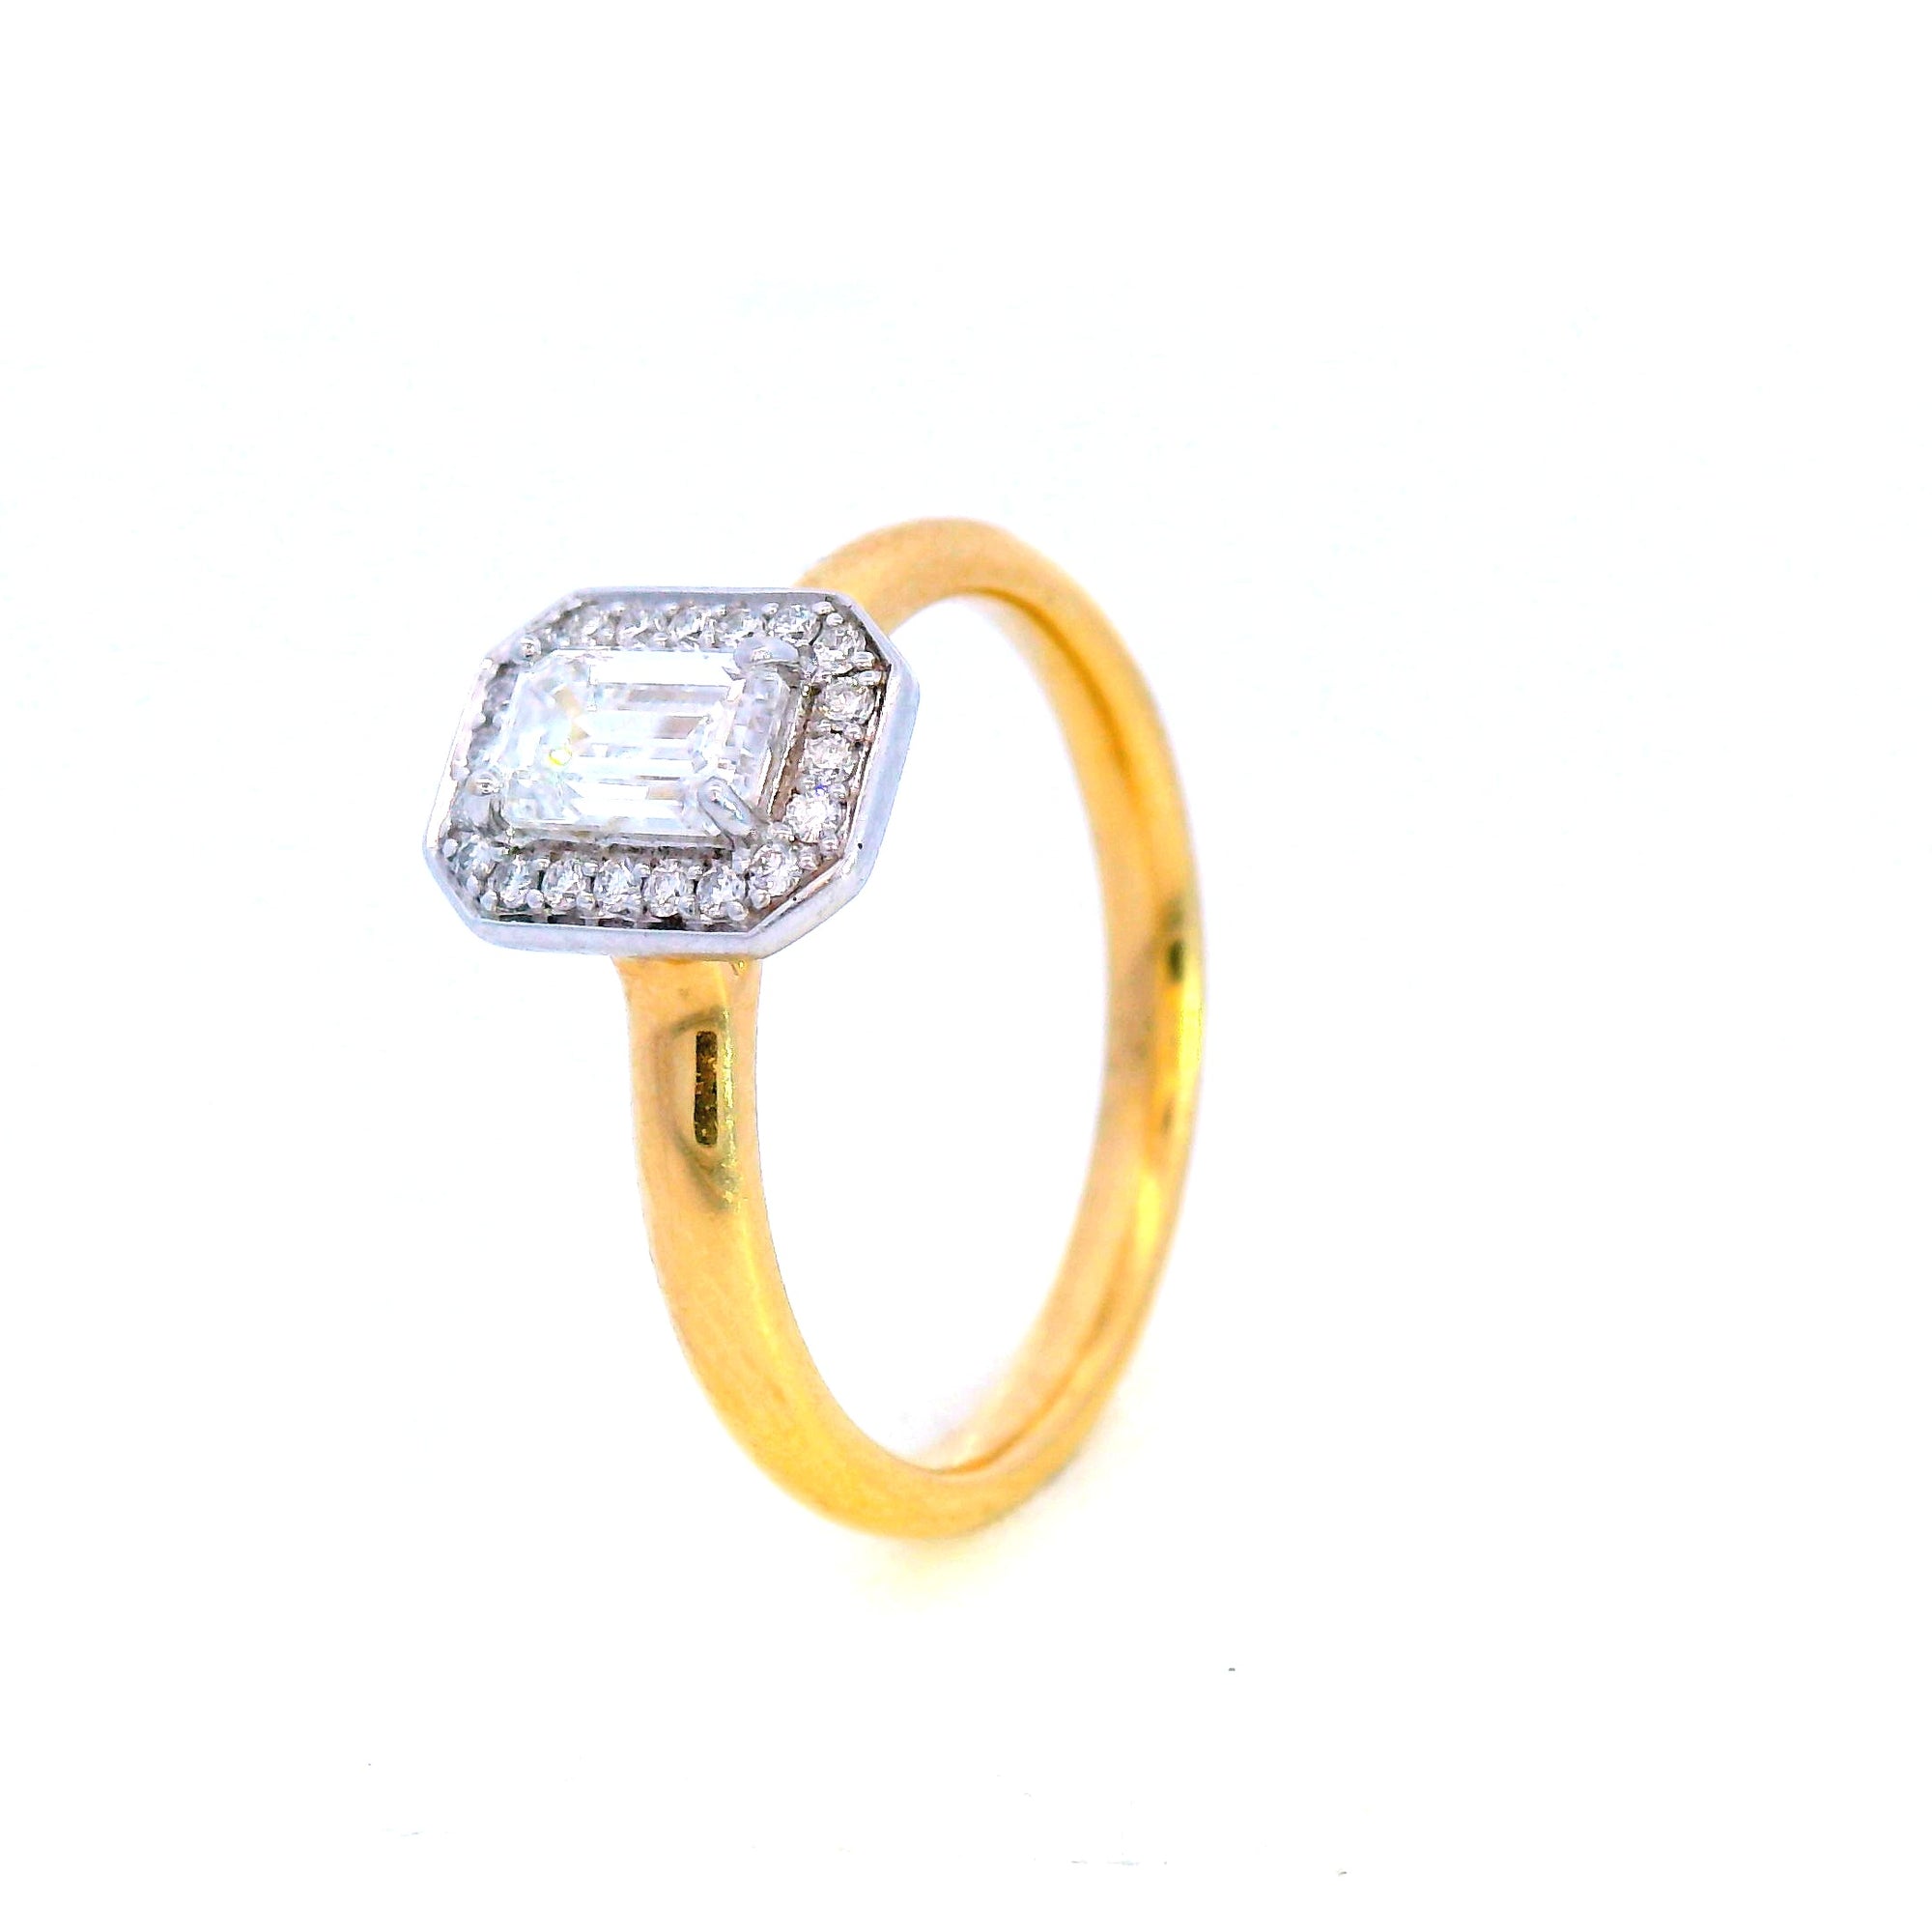 Diamond Radiant Engagement Ring in 18ct Yellow Gold